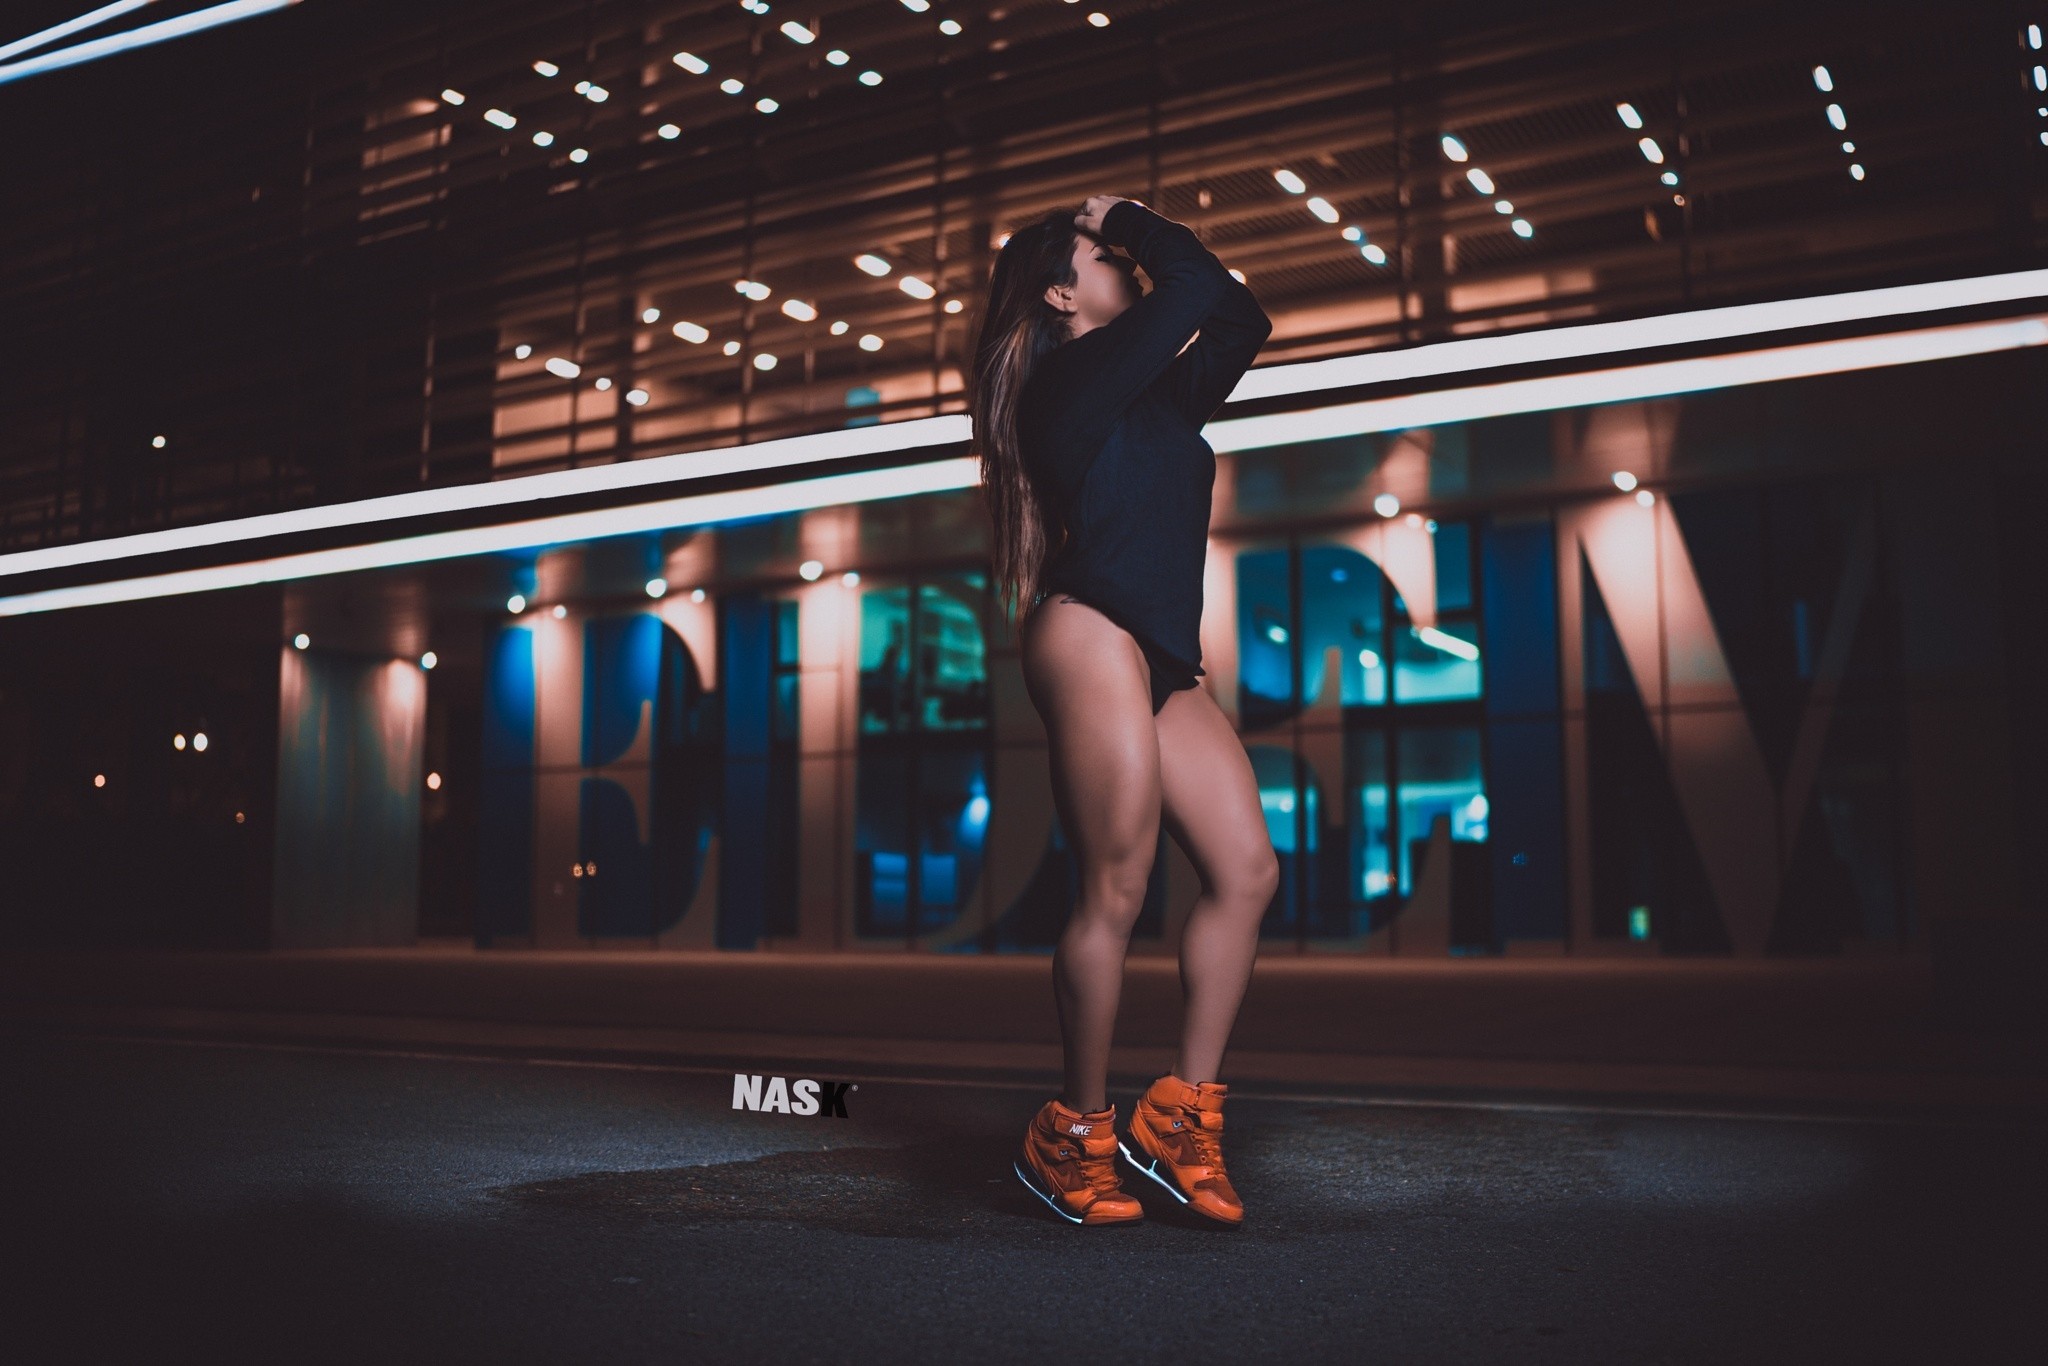 People 2048x1366 women tanned sneakers one-piece swimsuit Nask Nach Ingrid Ramon outdoors night model legs orange shoes arms up thighs long hair brunette Nike